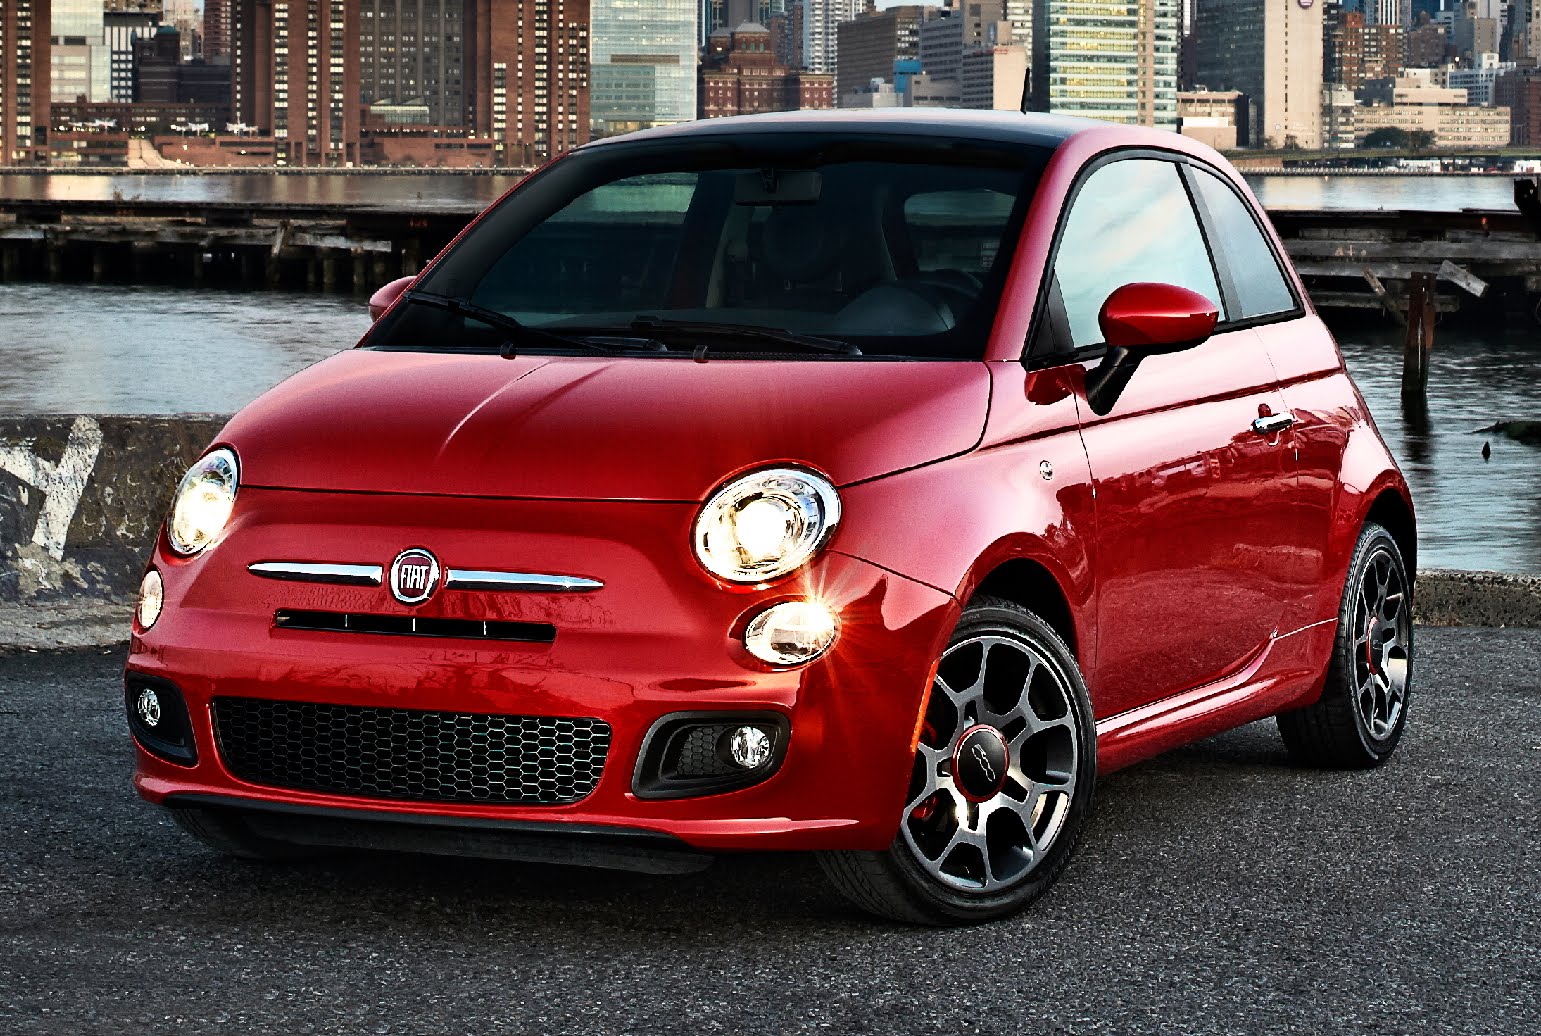 2012 FIAT 500C Specs, Prices and Reviews ~ The Automotive Area